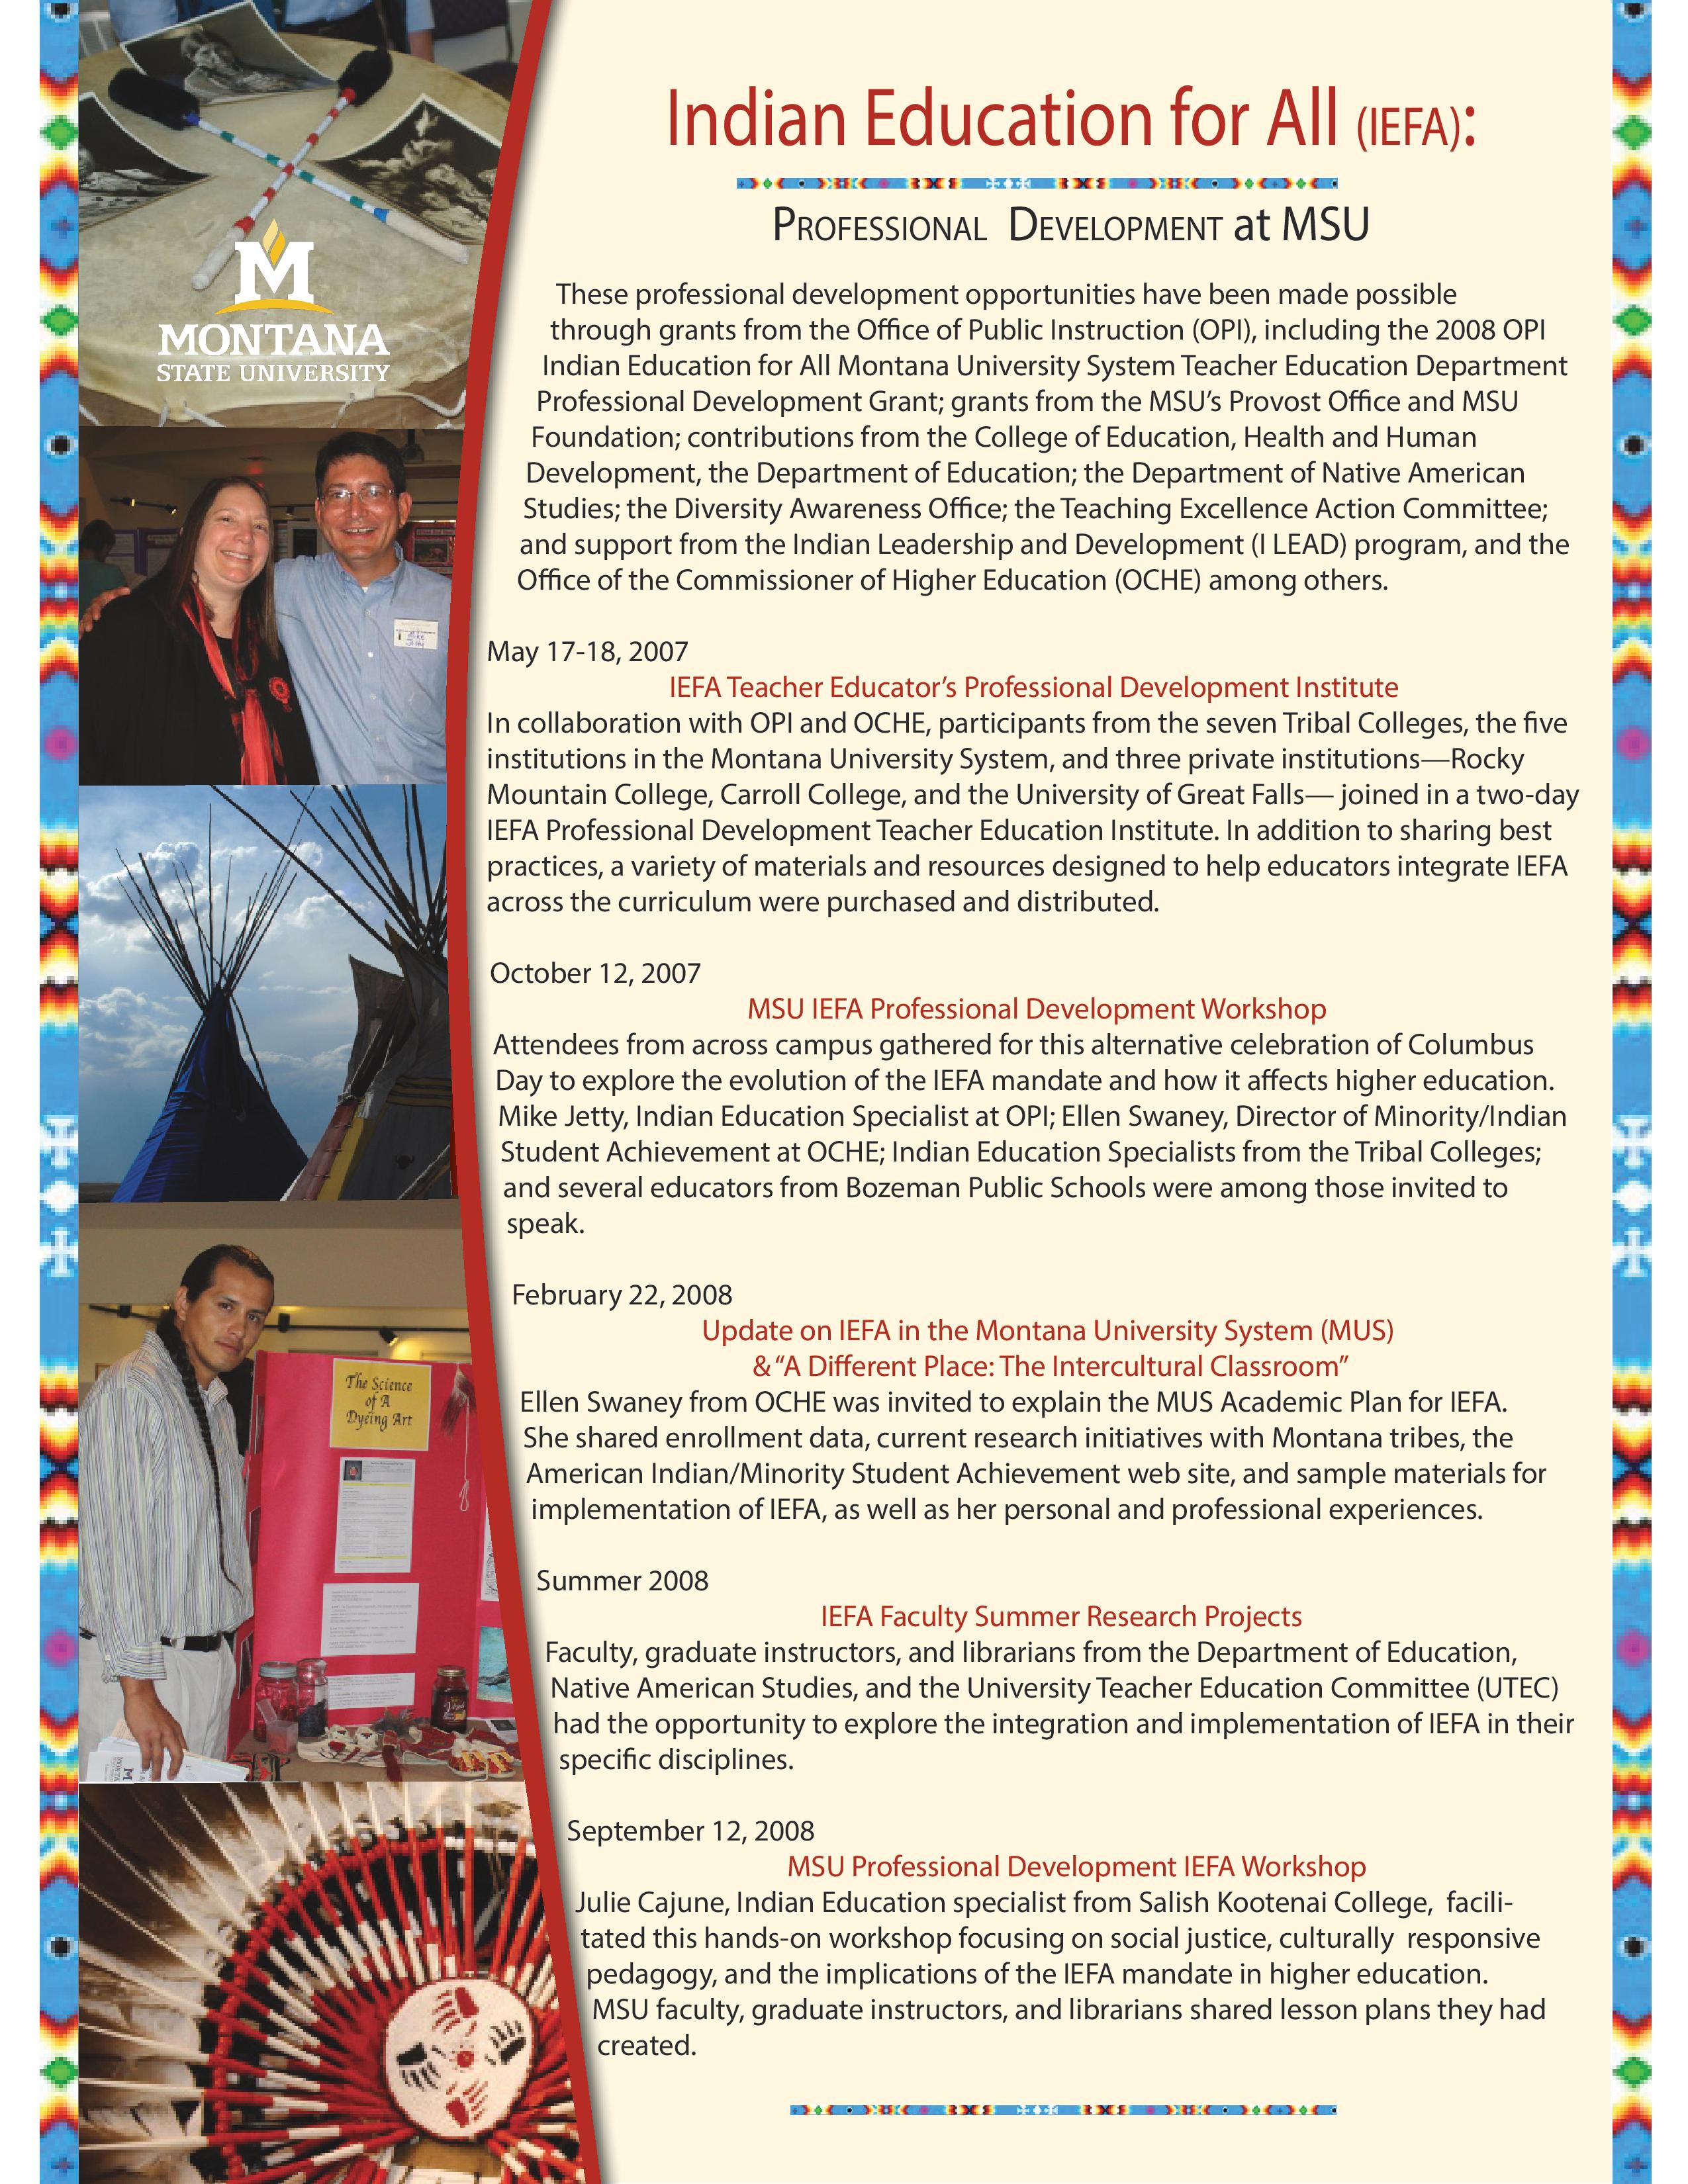 Indian education for all professional development flyer part 1. Click to download PDF